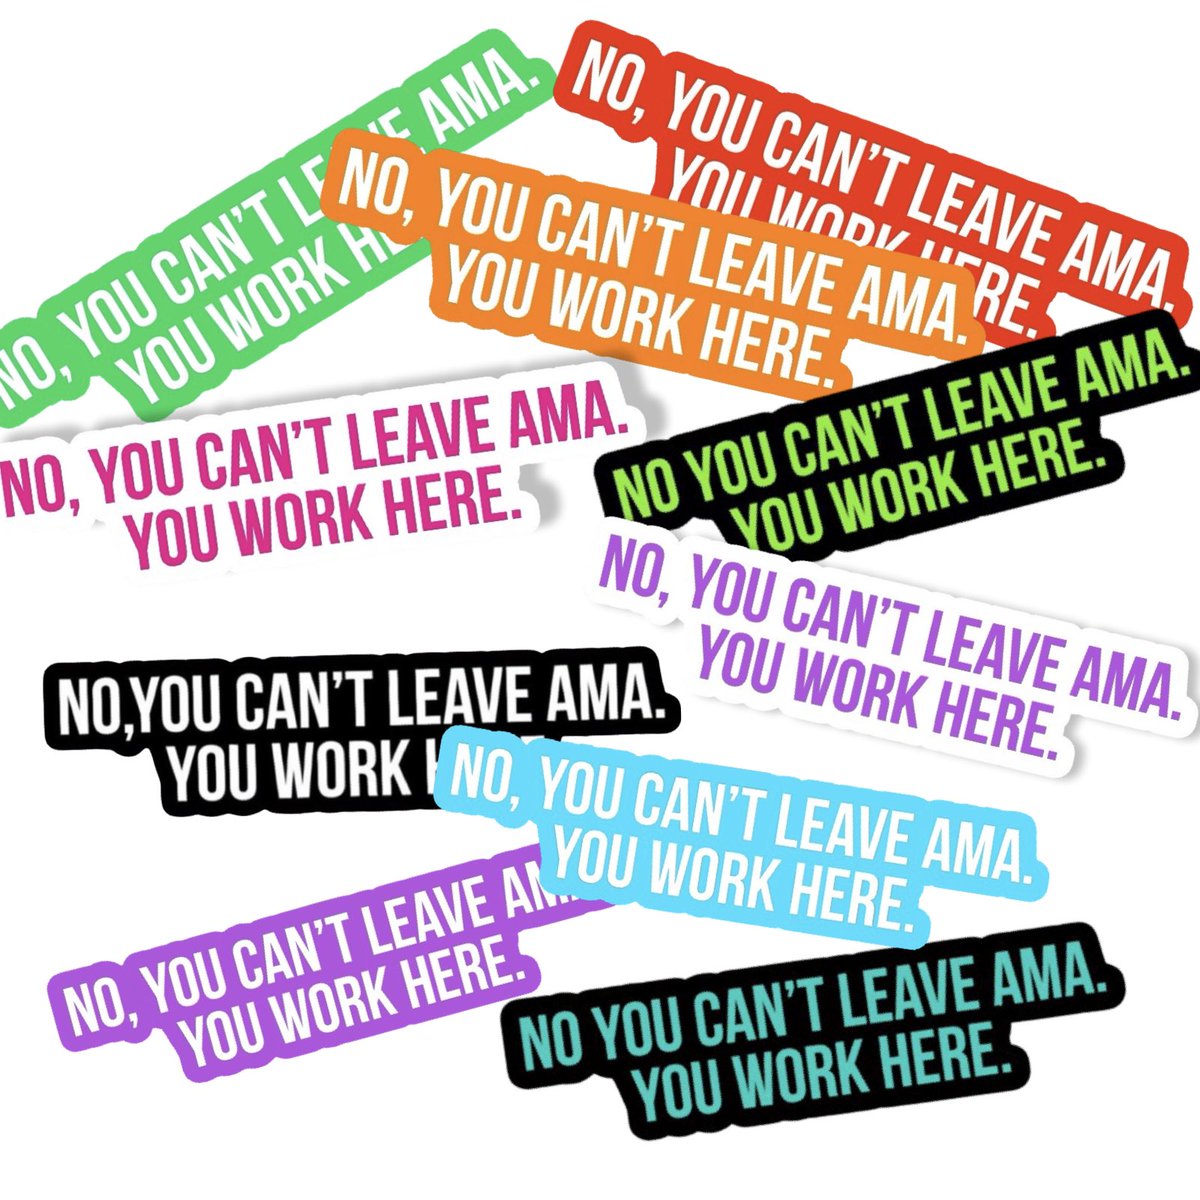 You guys seemed to really like these AMA stickers so in the spirit of Nurses Week approaching I figured why not an AMA pack and make them more for less to give to all your emotional support coworkers out there 🩺💊💉 #nursetwitter #nursehumor #nursesweek

brokeclothingaddict.com/stickerpacks/m…